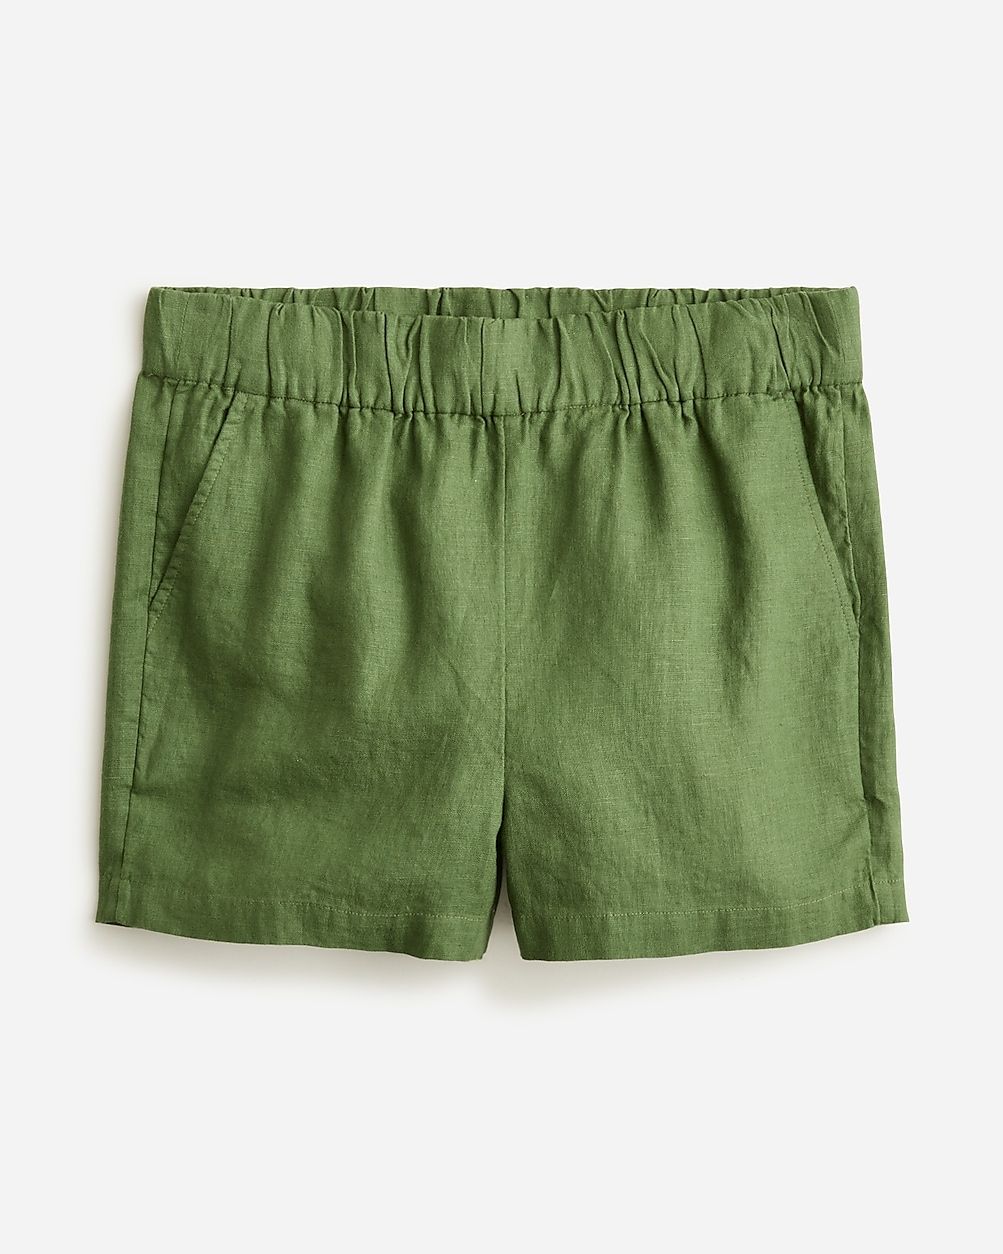 Shop this looknew color4.7(73 REVIEWS)Tropez short in linen$69.50Utility GreenSelect a sizeSize &... | J.Crew US